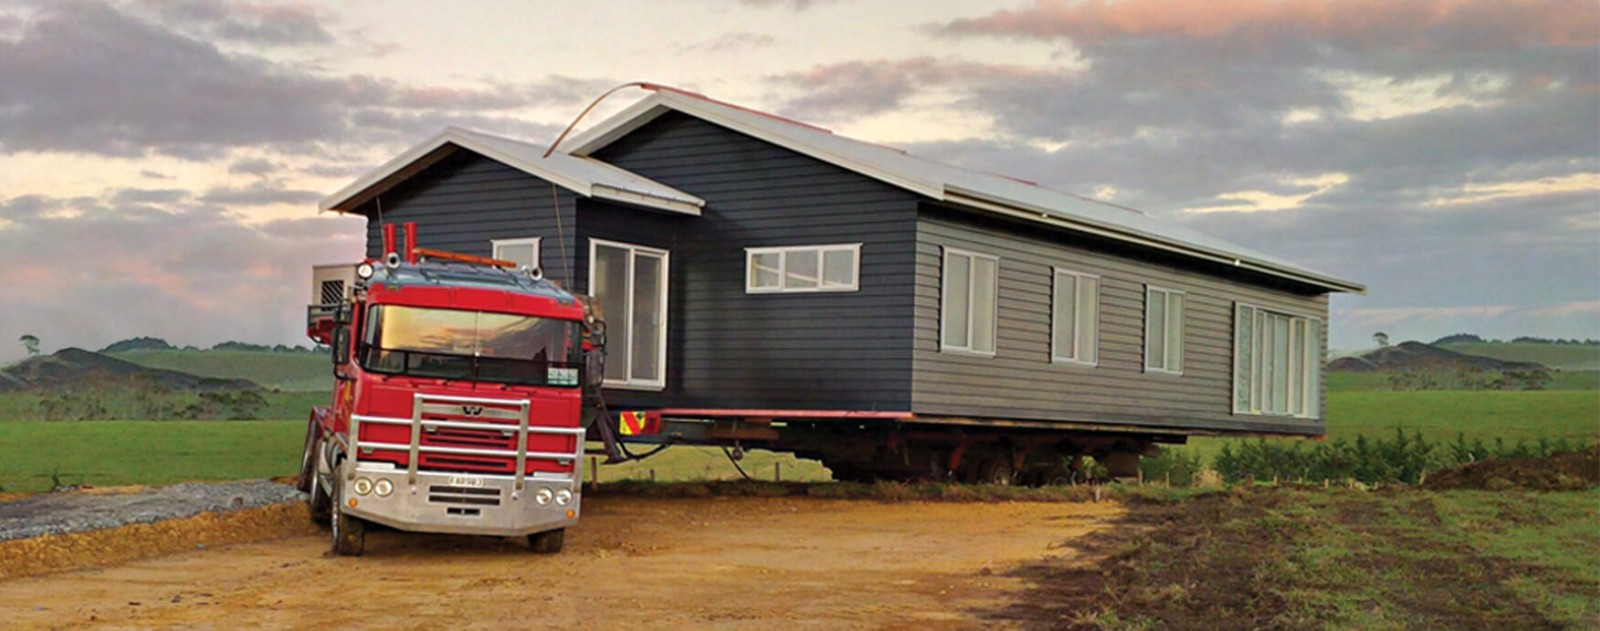 LXP - Lifexpe - Life Experiences - Most Affordable Modular Transportable Homes Help Save Money